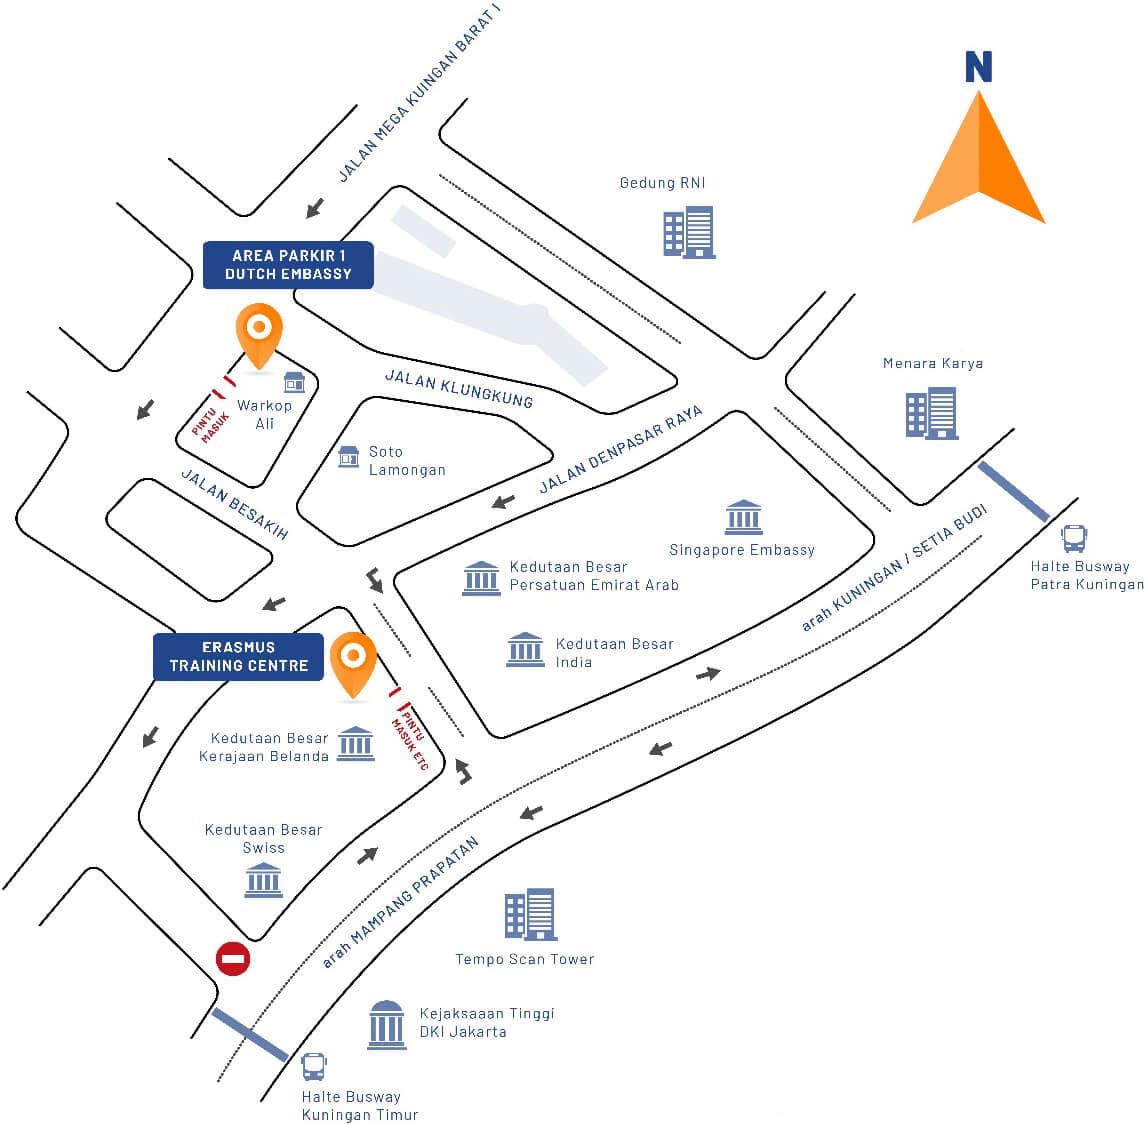 You can park at Area Parkir 1 which is one block behind the Dutch Embassy compound.